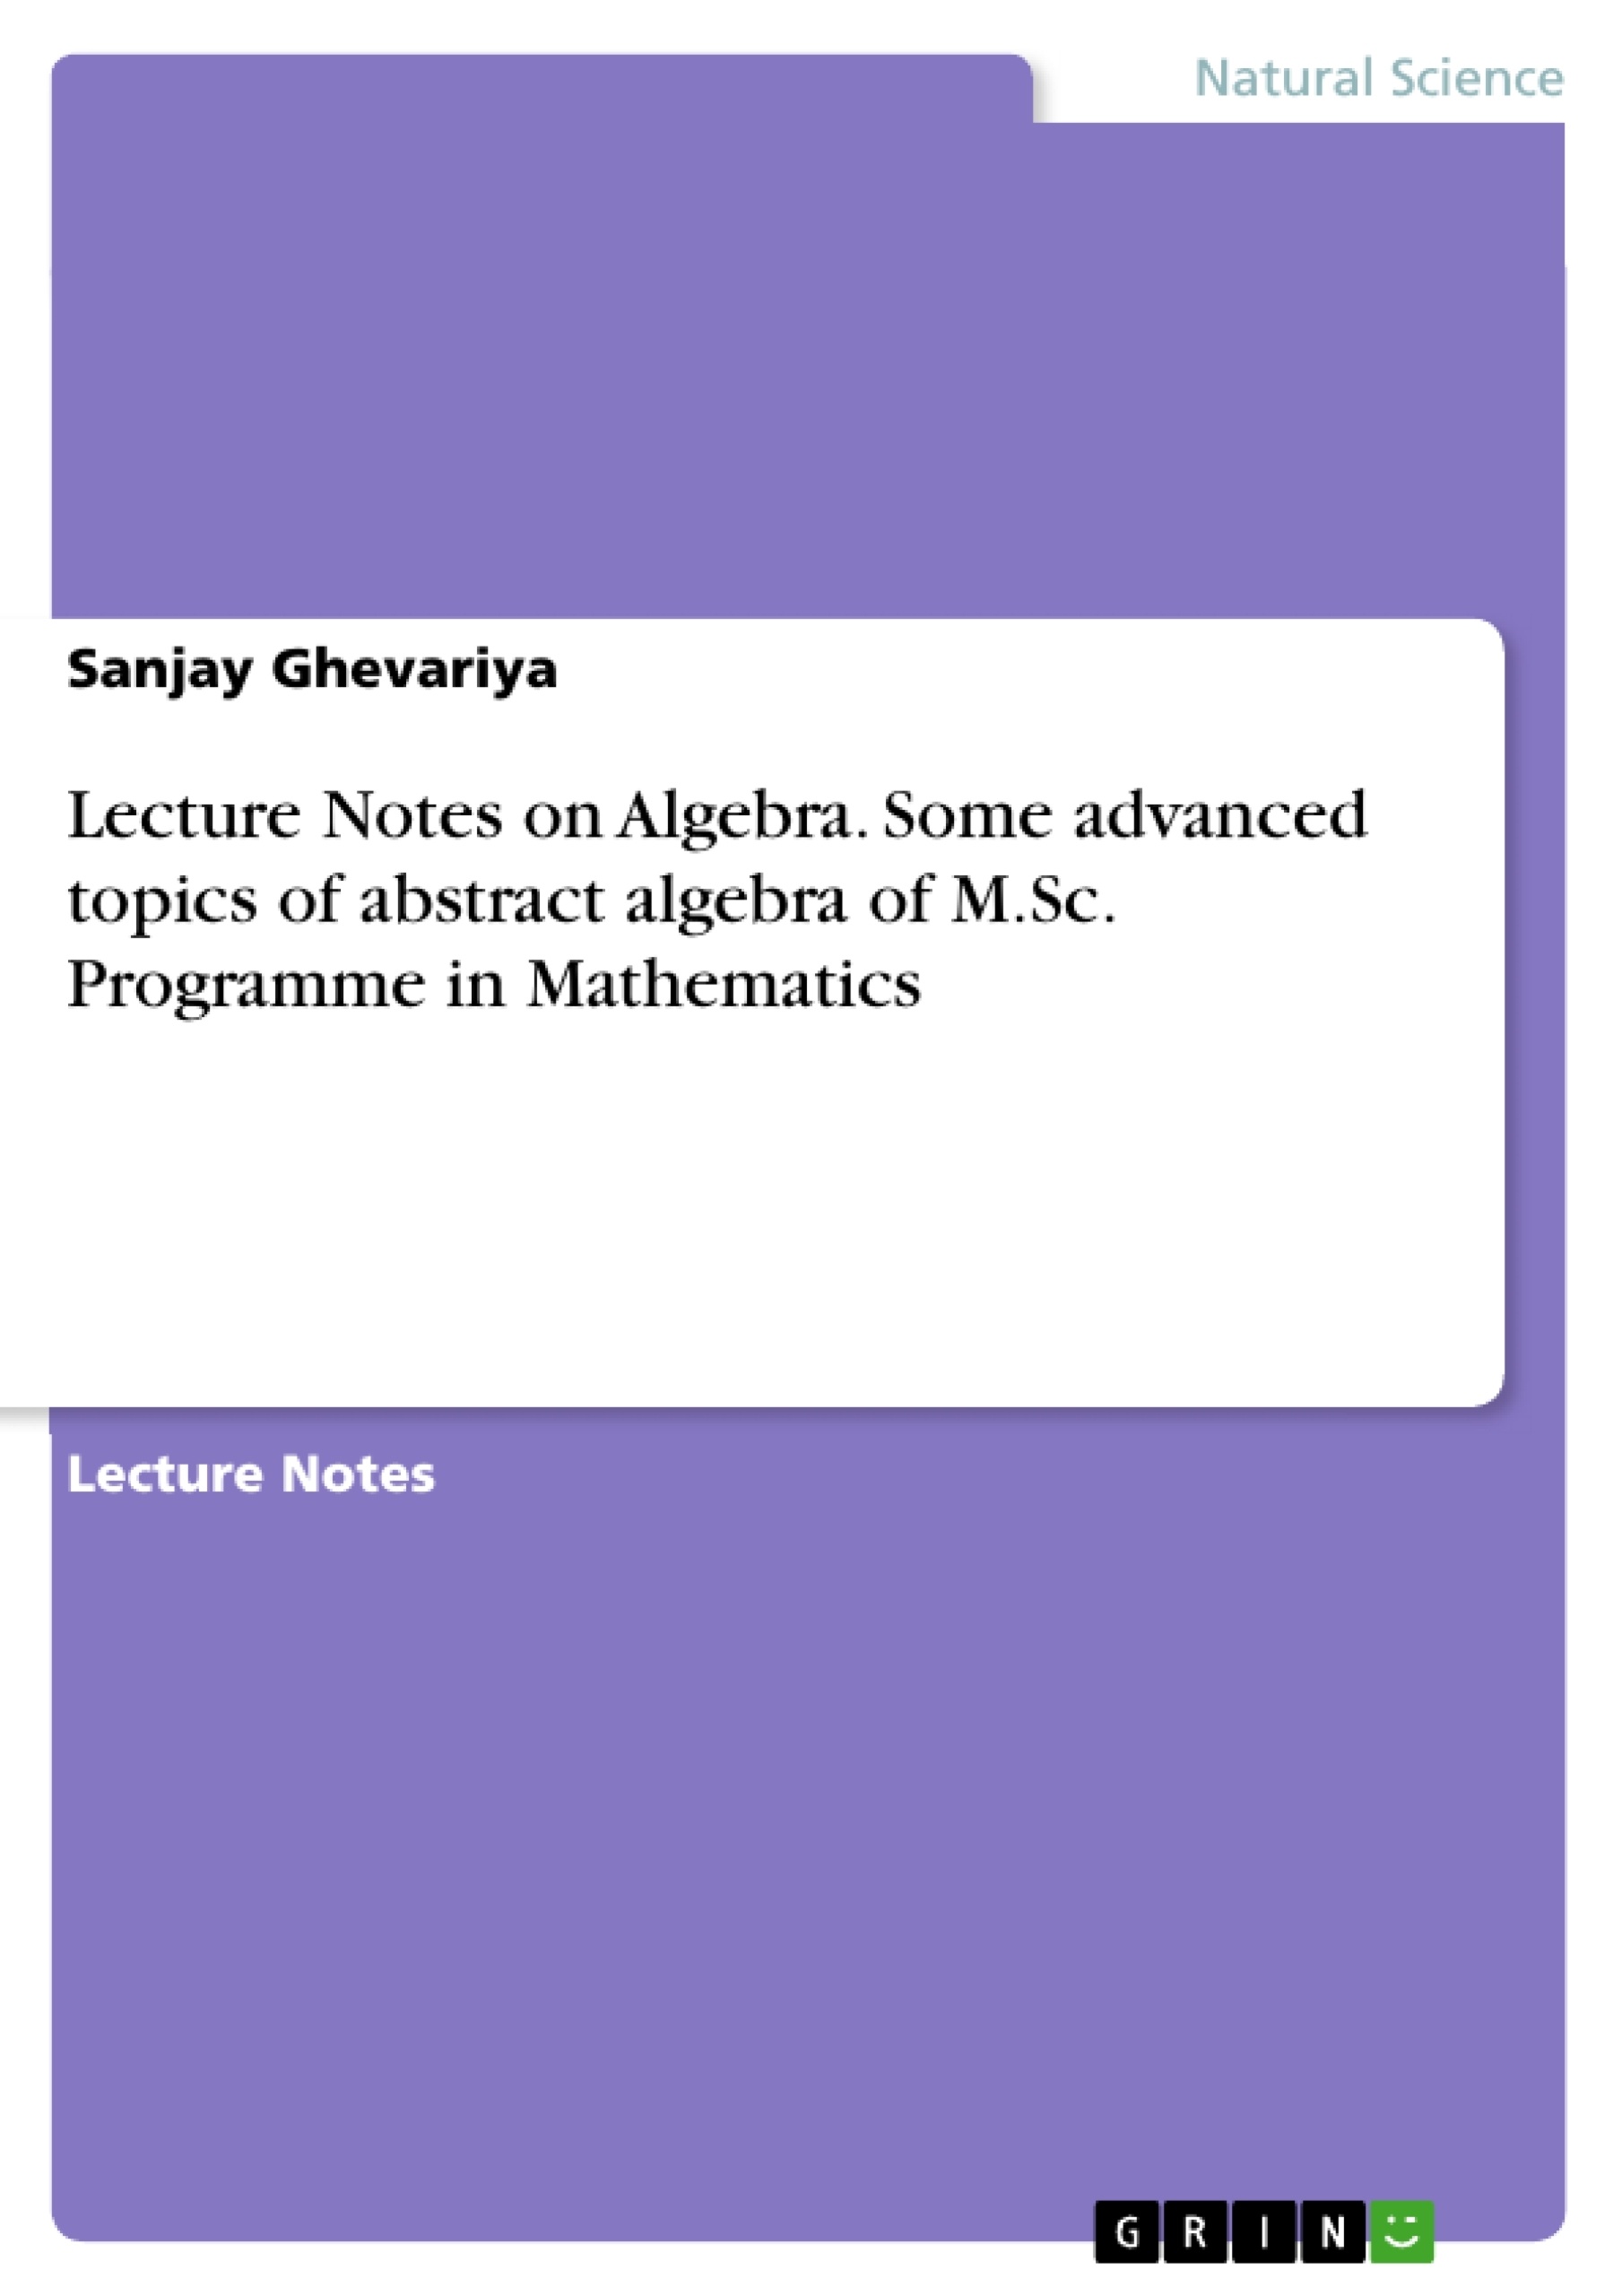 Titre: Lecture Notes on Algebra. Some advanced topics of abstract algebra of M.Sc. Programme in Mathematics